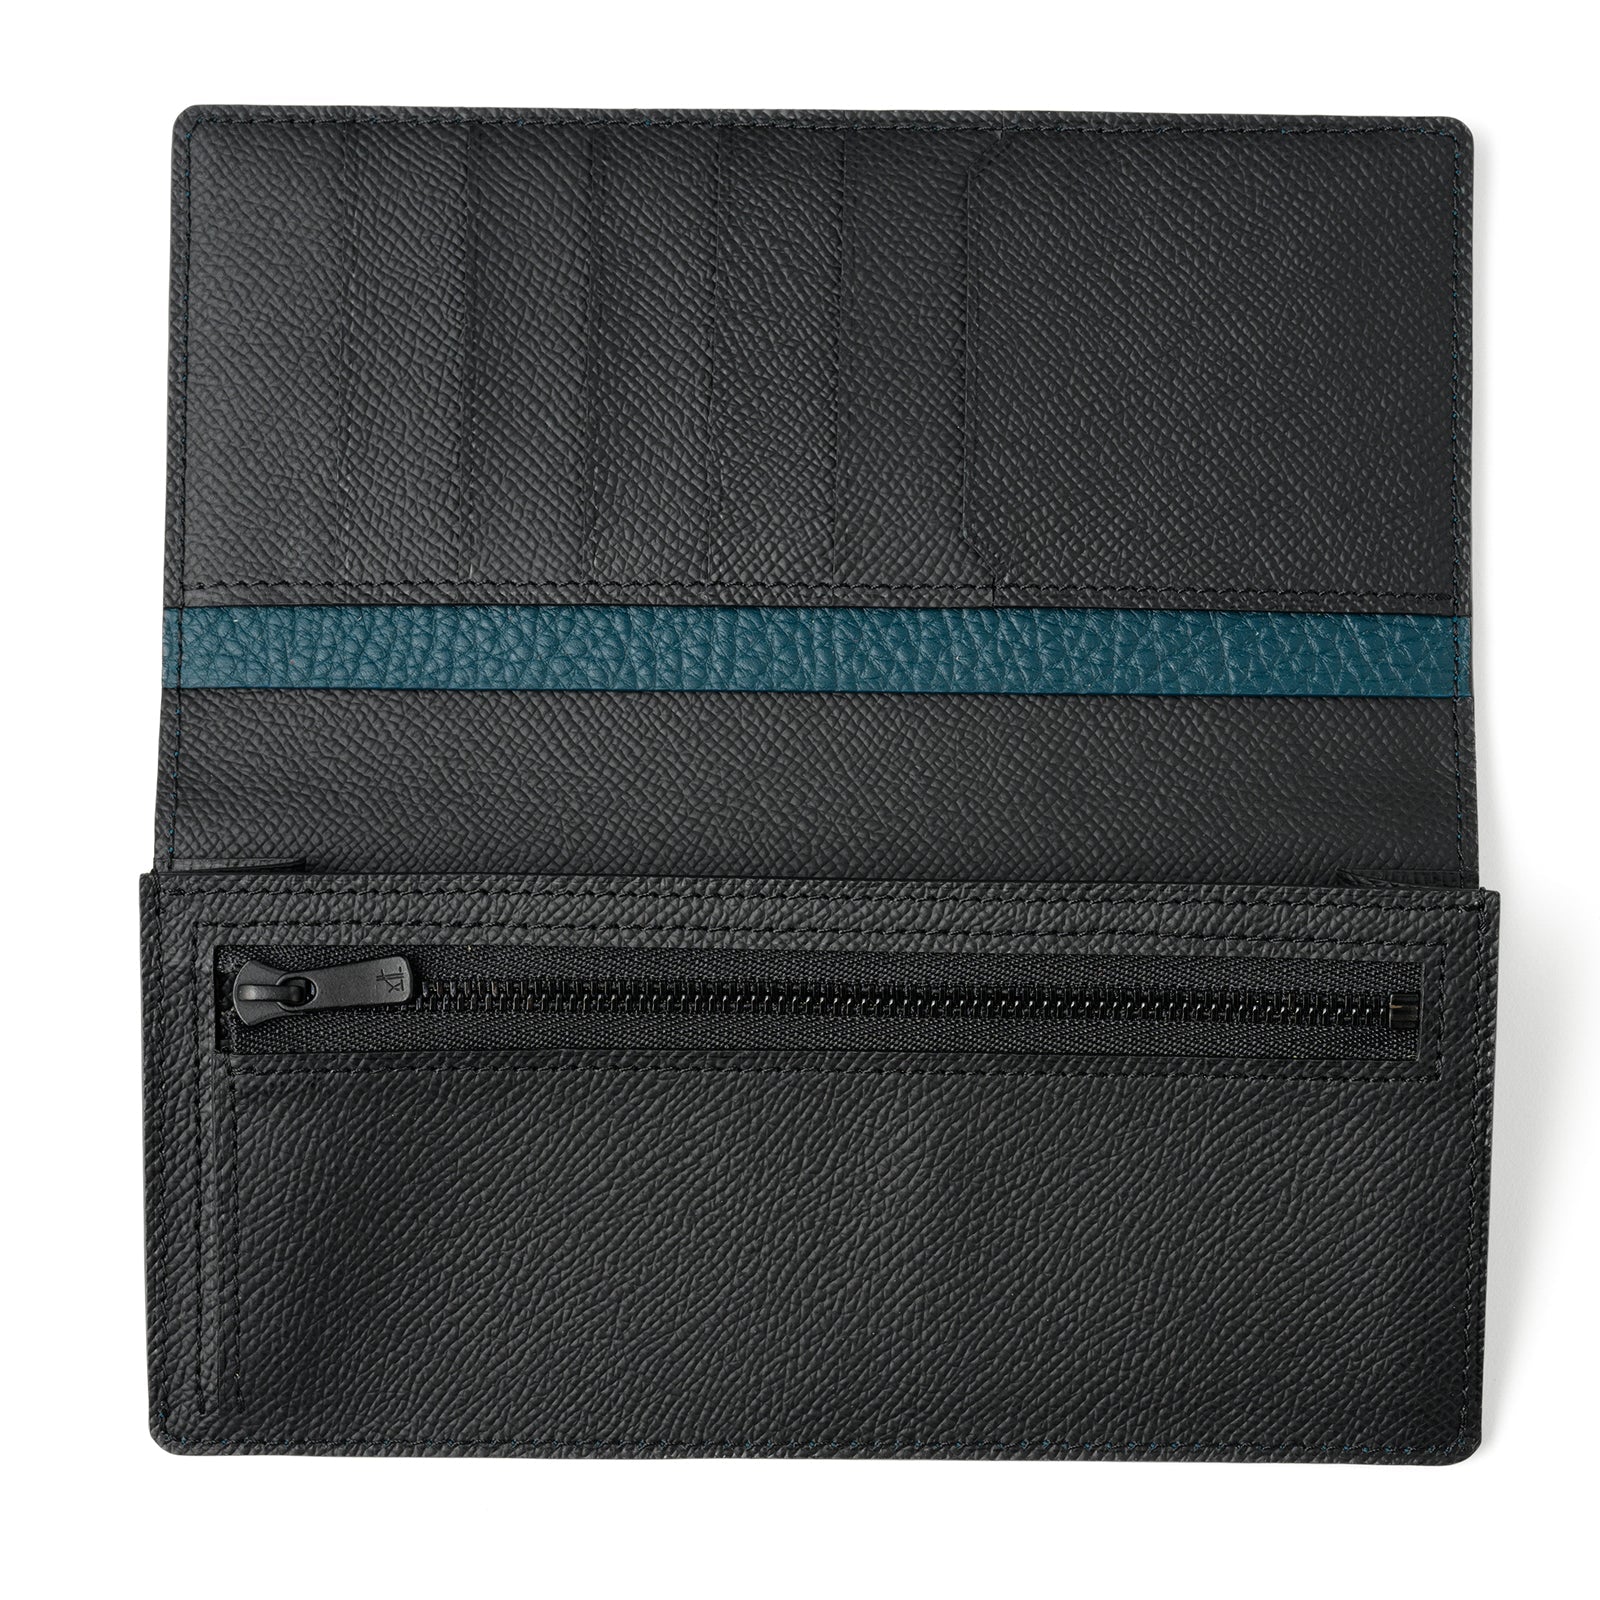 Bicolor bamboo gusset long wallet Togo leather